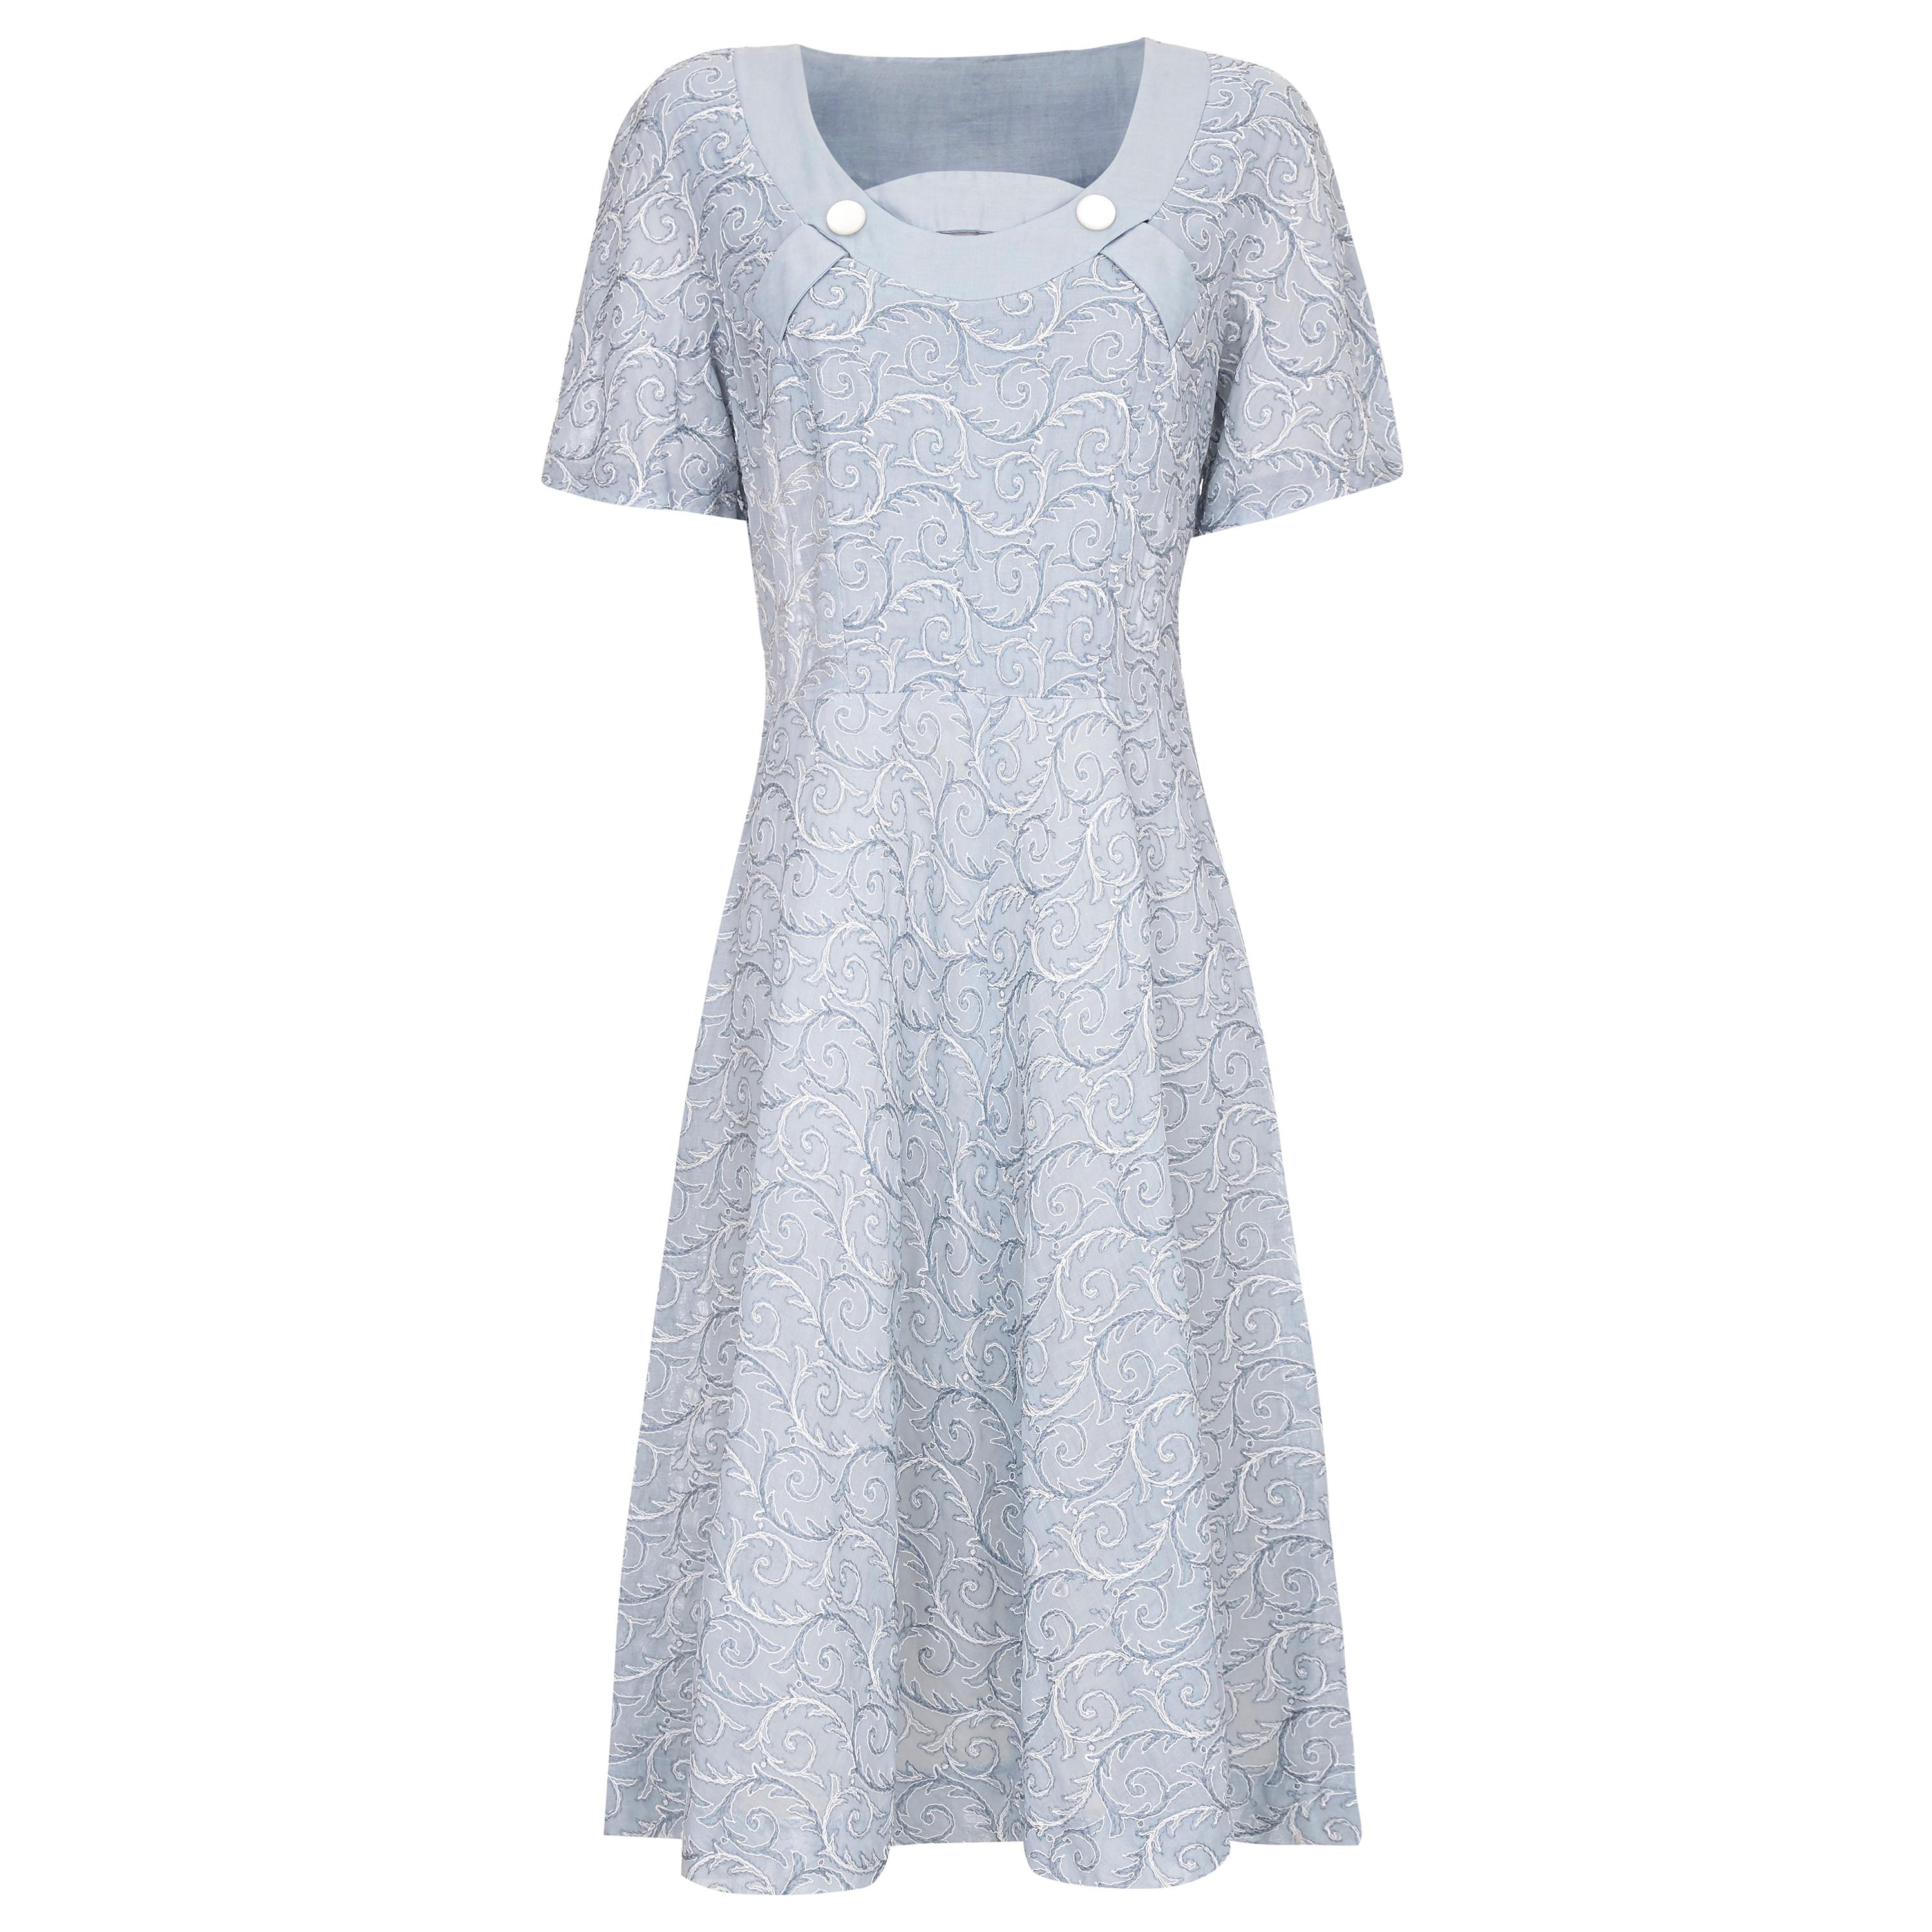 1950s Pale Blue Embroidered Cotton Dress 